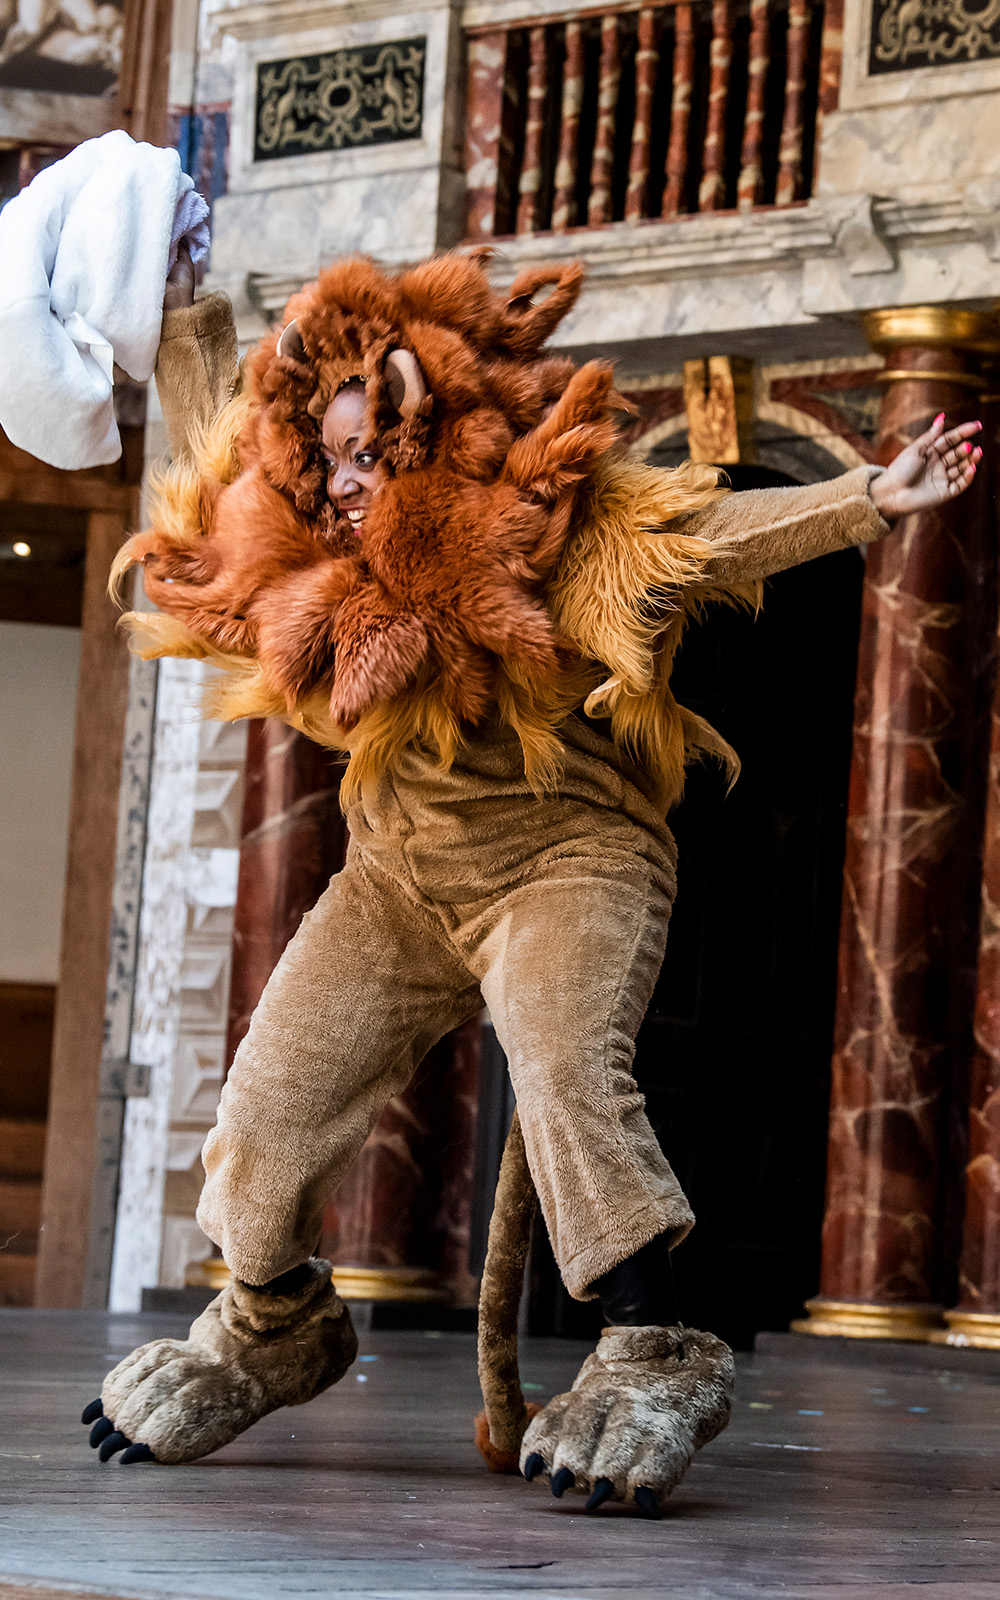 A person mid-air in a lion costume